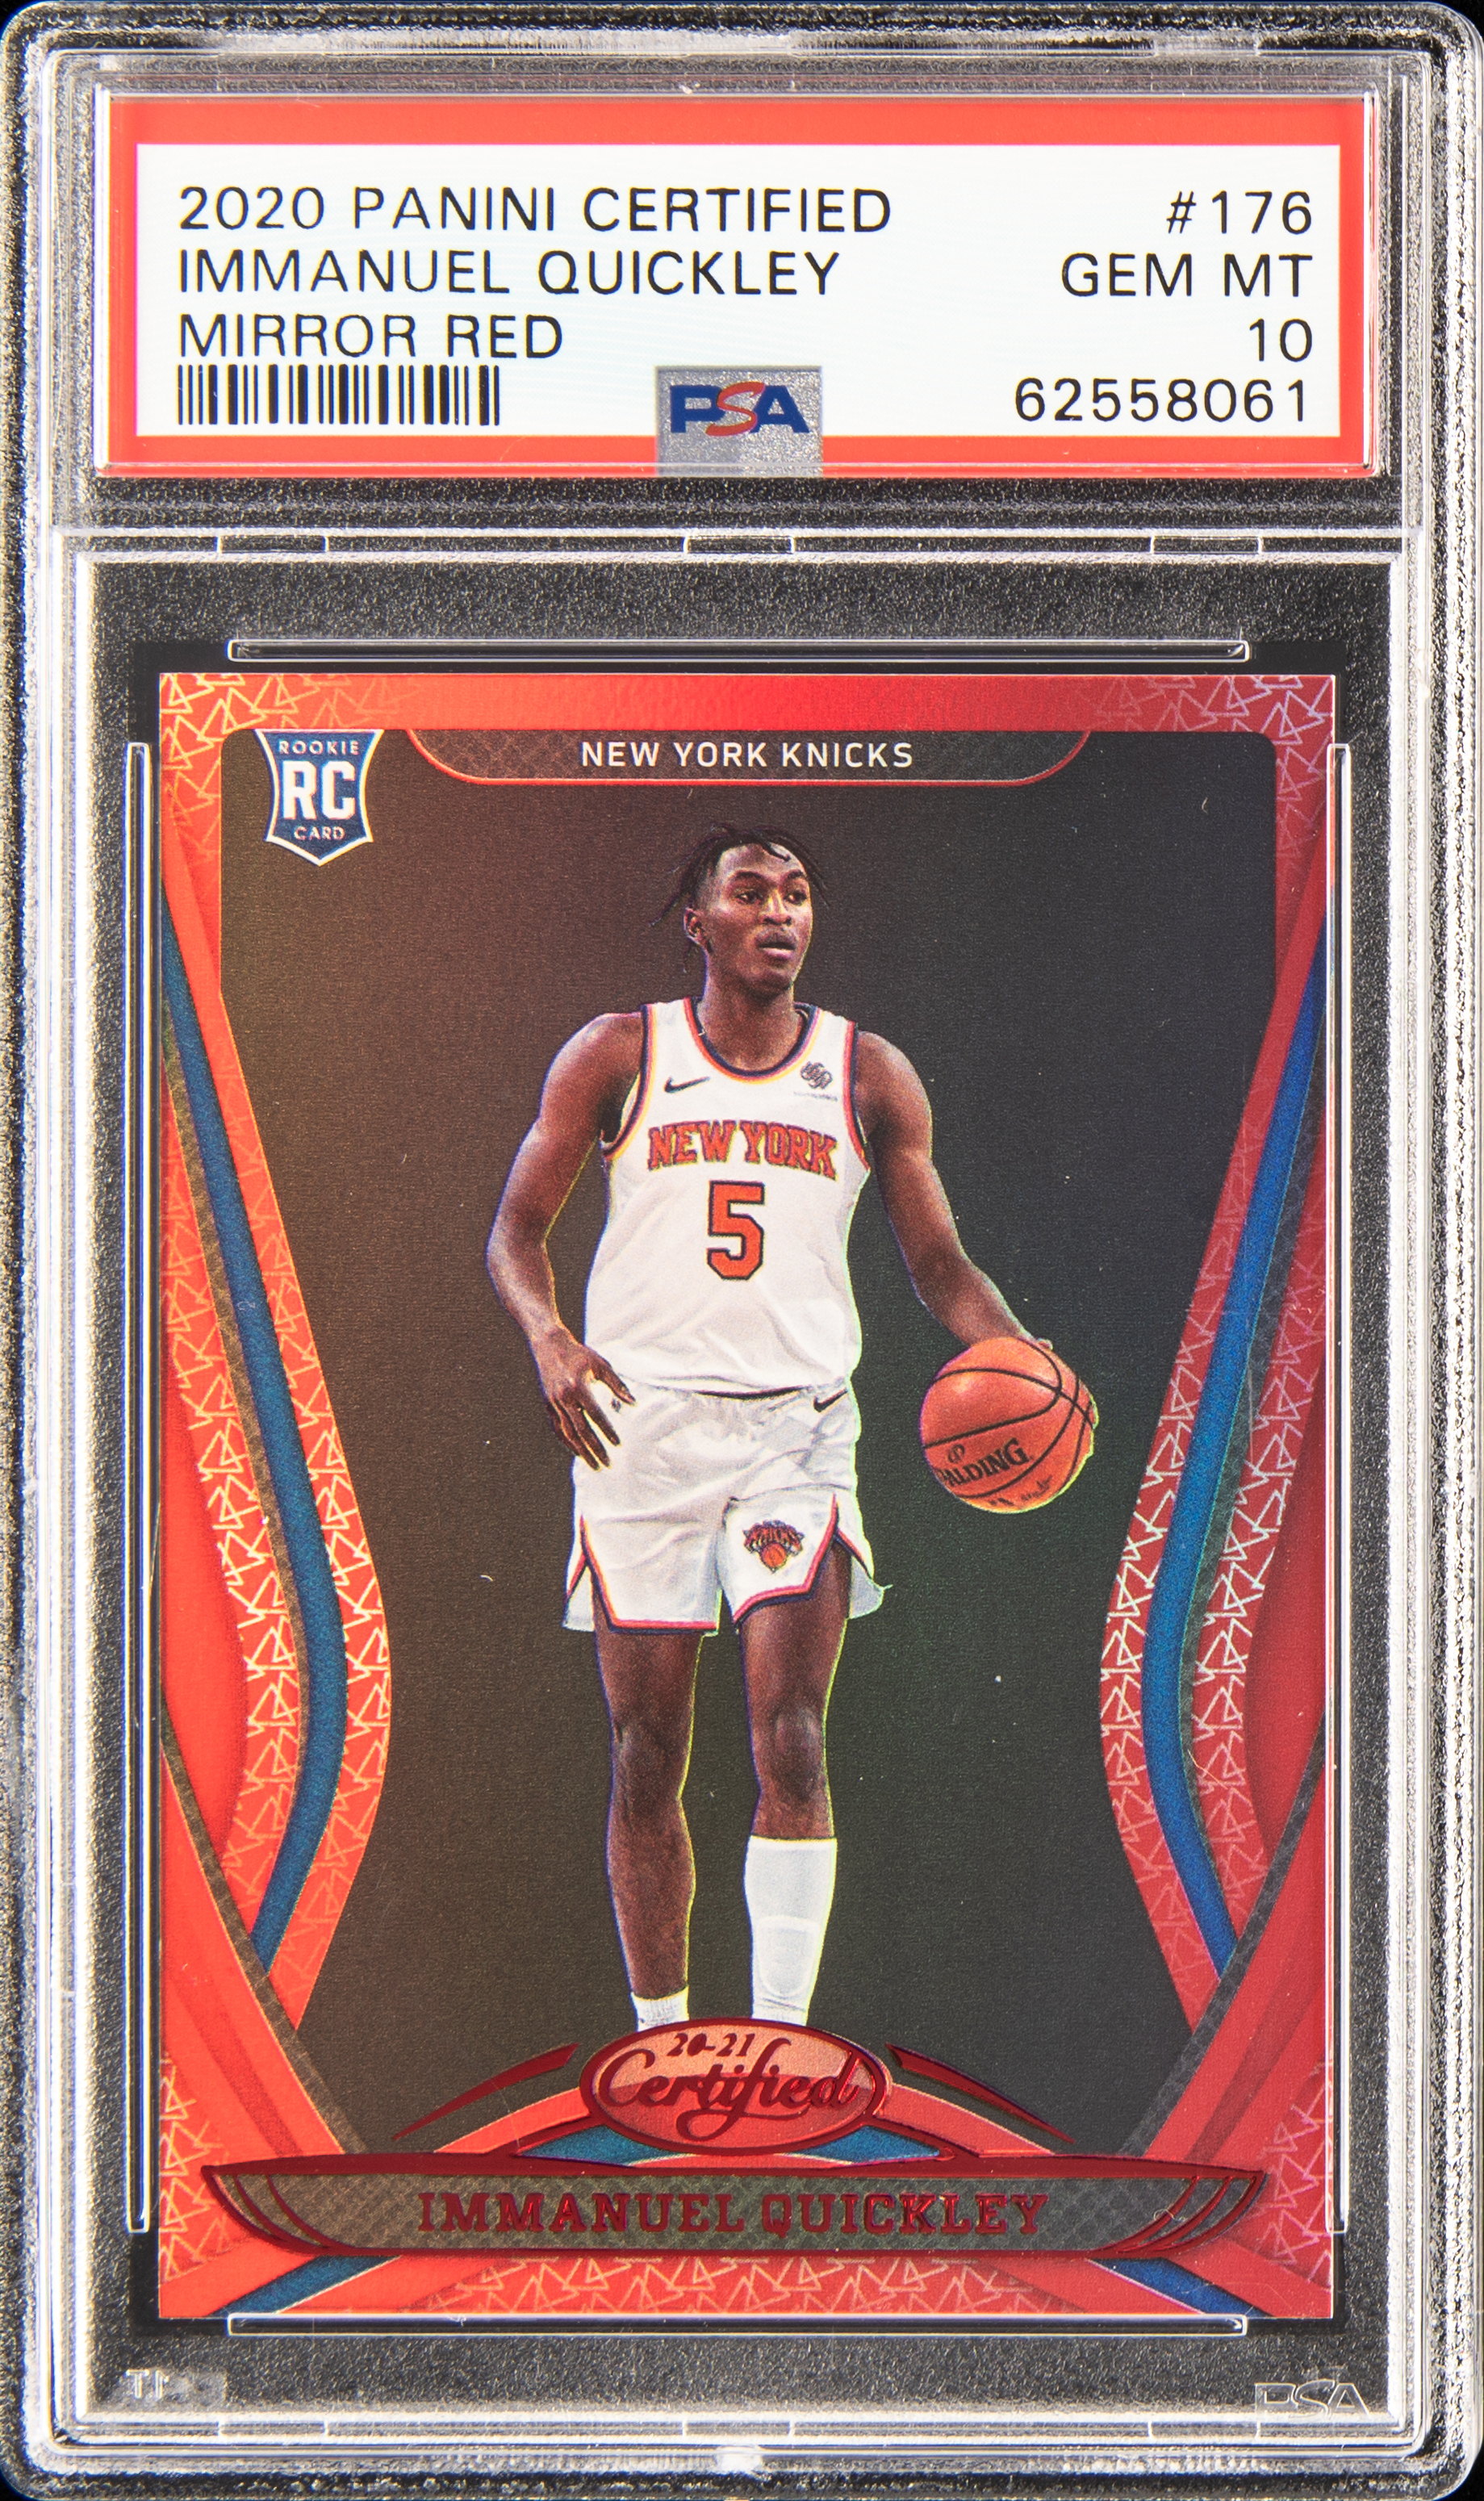 2020 Panini Certified Mirror Red 176 Immanuel Quickley Rookie Card – PSA GEM MT 10